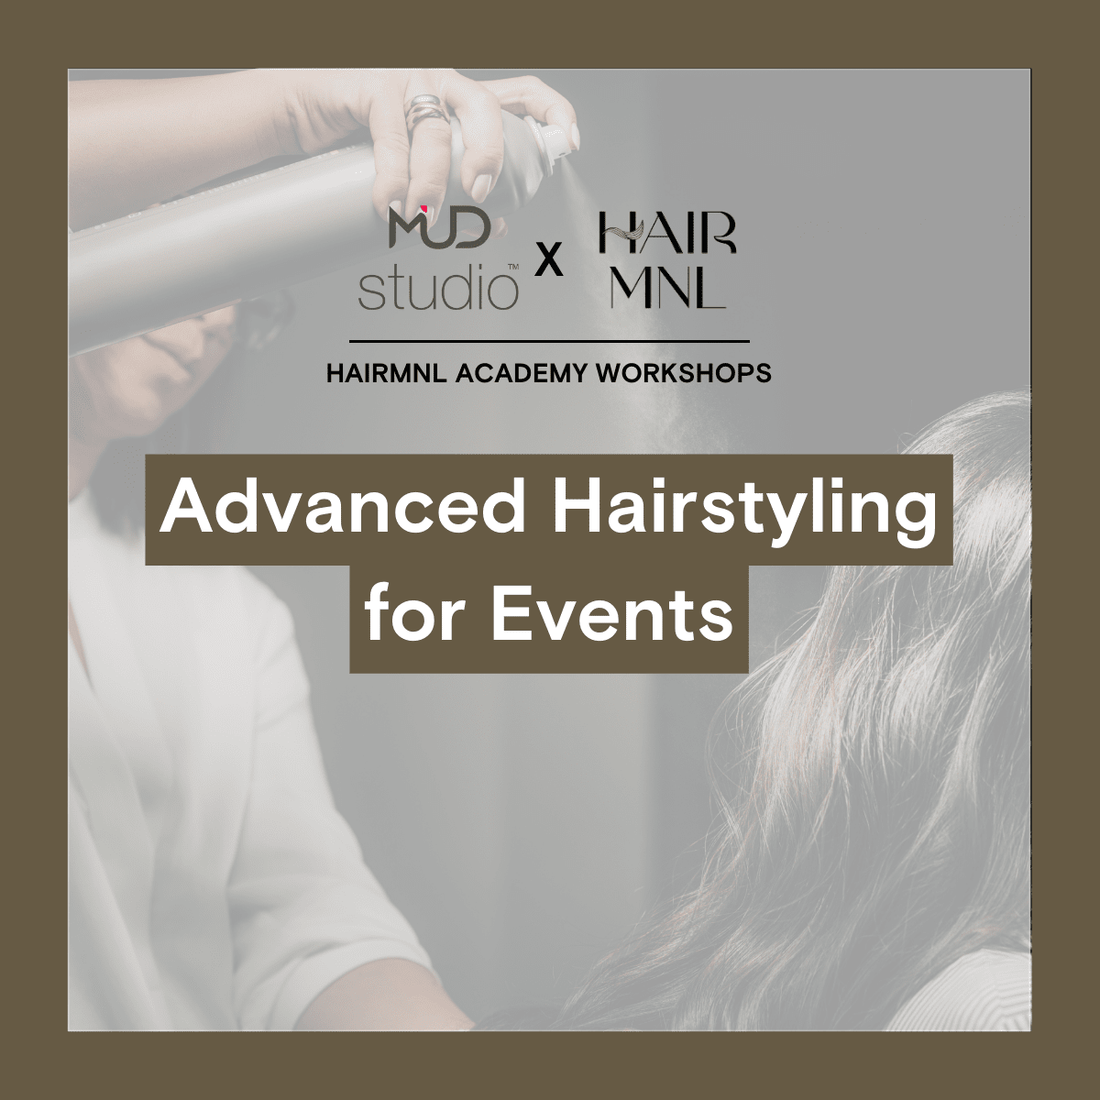 HairMNL Academy Workshops by MUD Studio Pro Advanced Hair Styling for Events